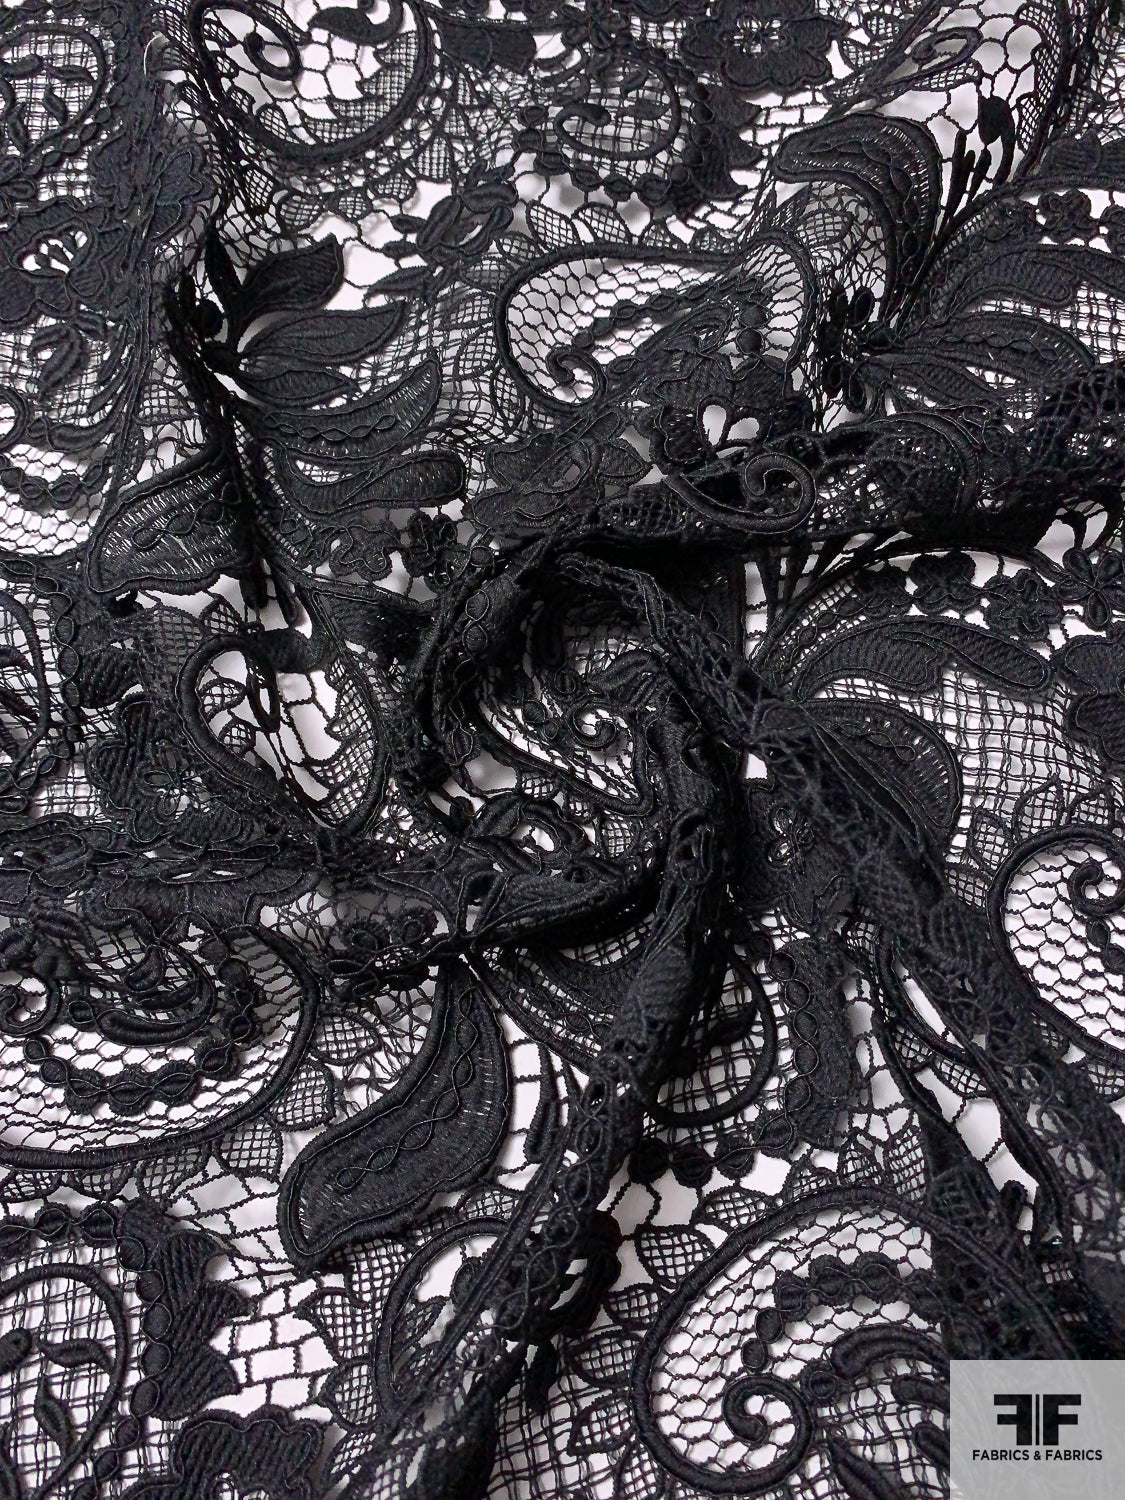 Pamella Roland Paisley Floral Guipure Lace - Black - Fabric by the Yard